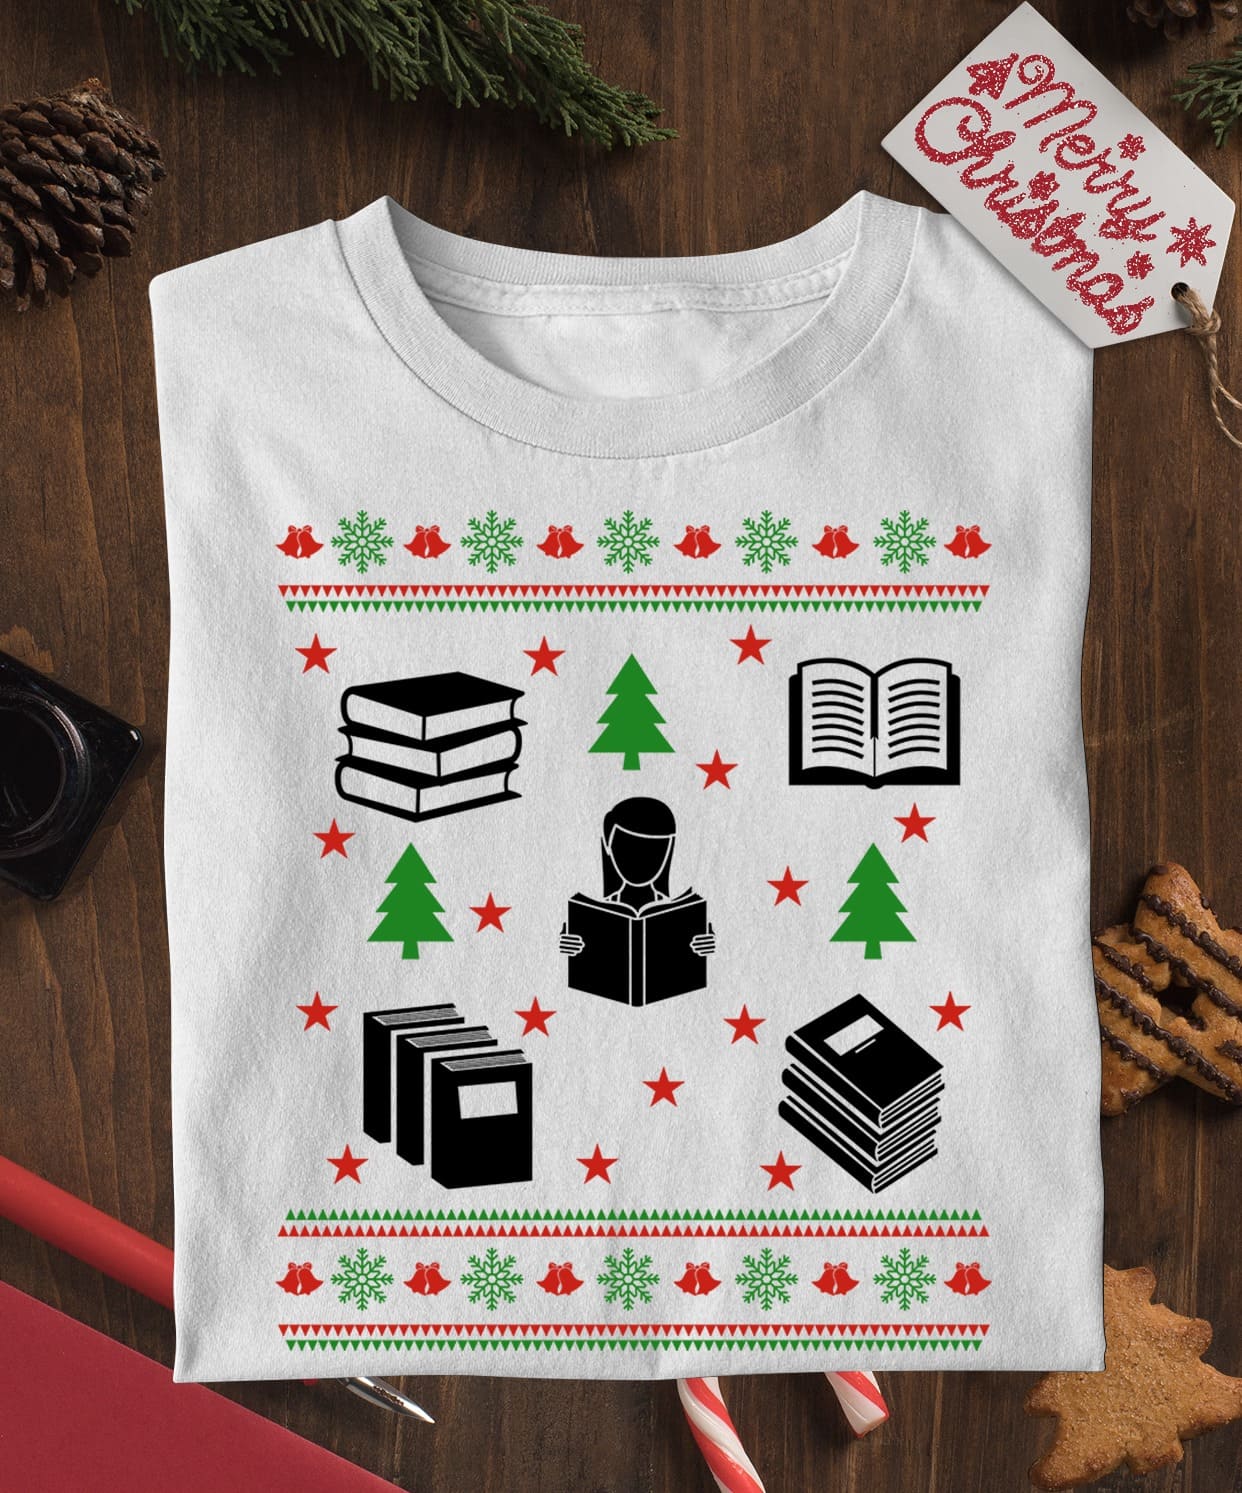 Merry Christmas T-shirt - Christmas gift for bookaholic, reading book the hobby